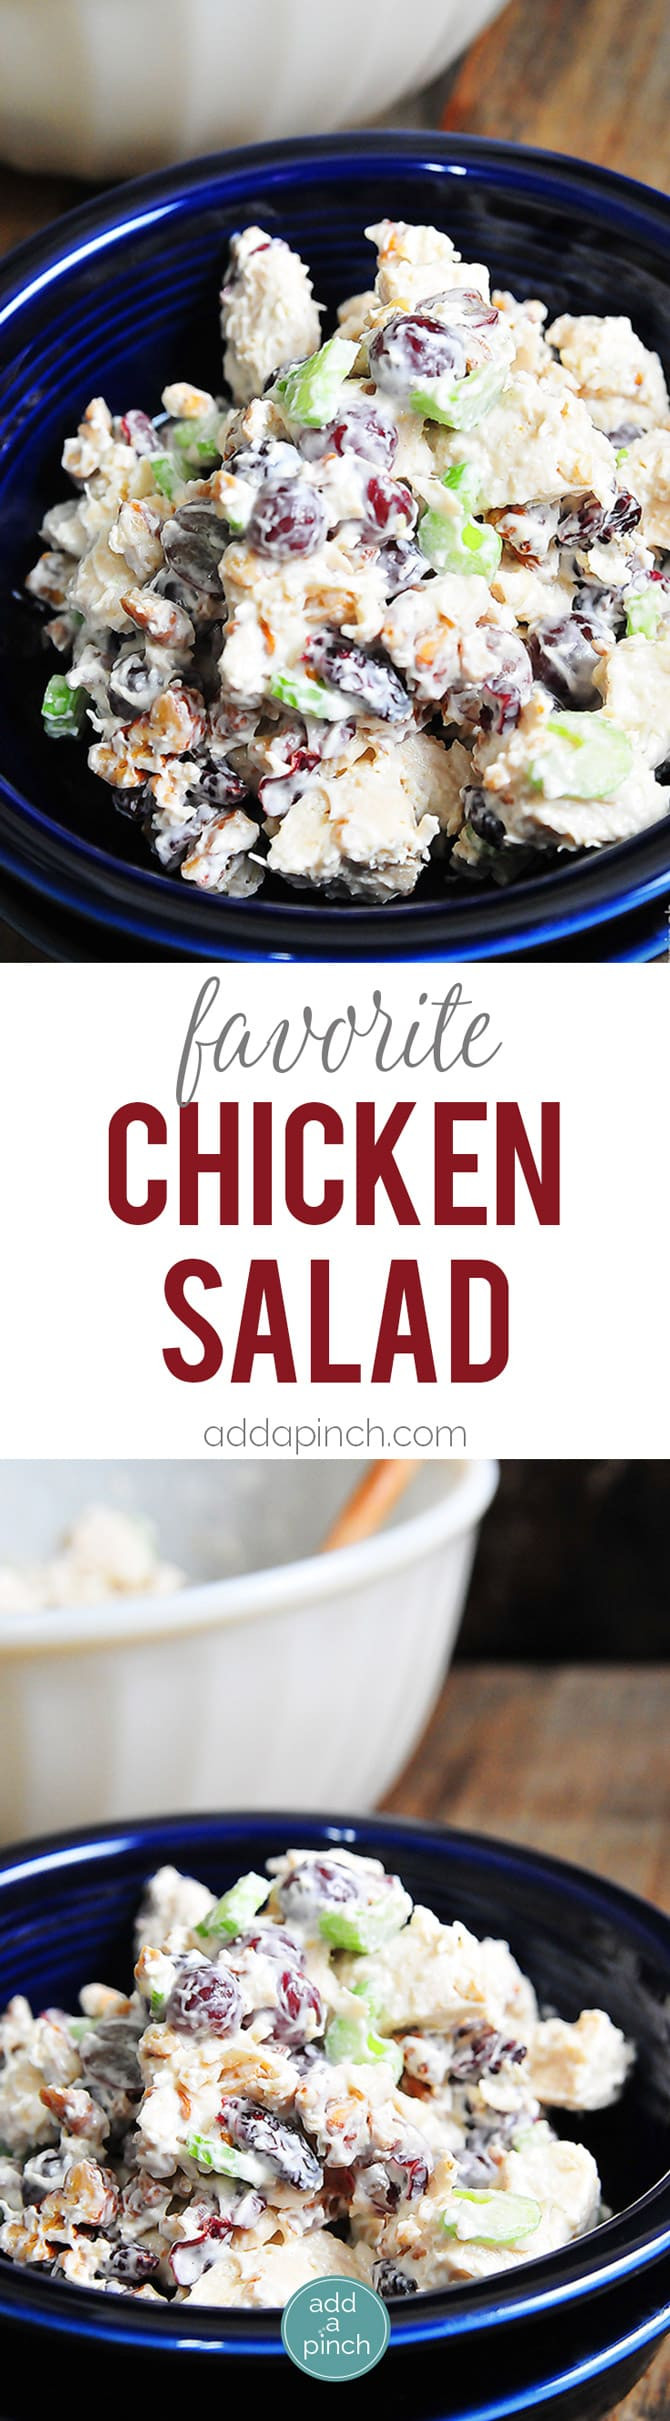 Chicken Salad Chick Grape Salad Recipe
 Chicken Salad with Grapes Recipe Cooking